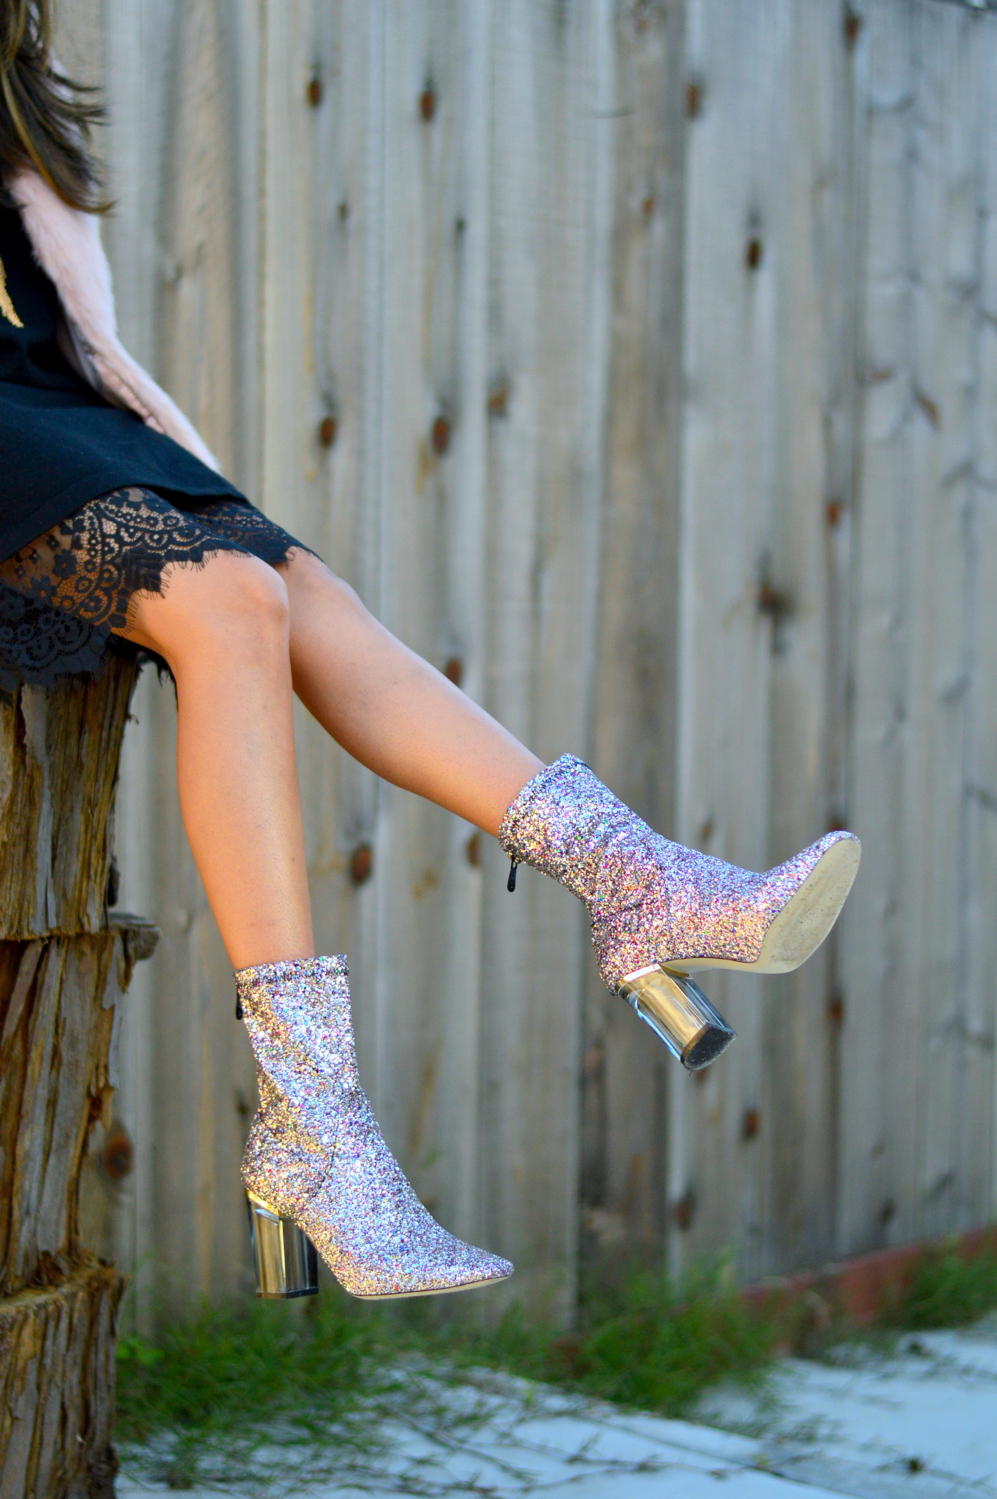 How to Wear Glitter Ankle Boots – People & Styles